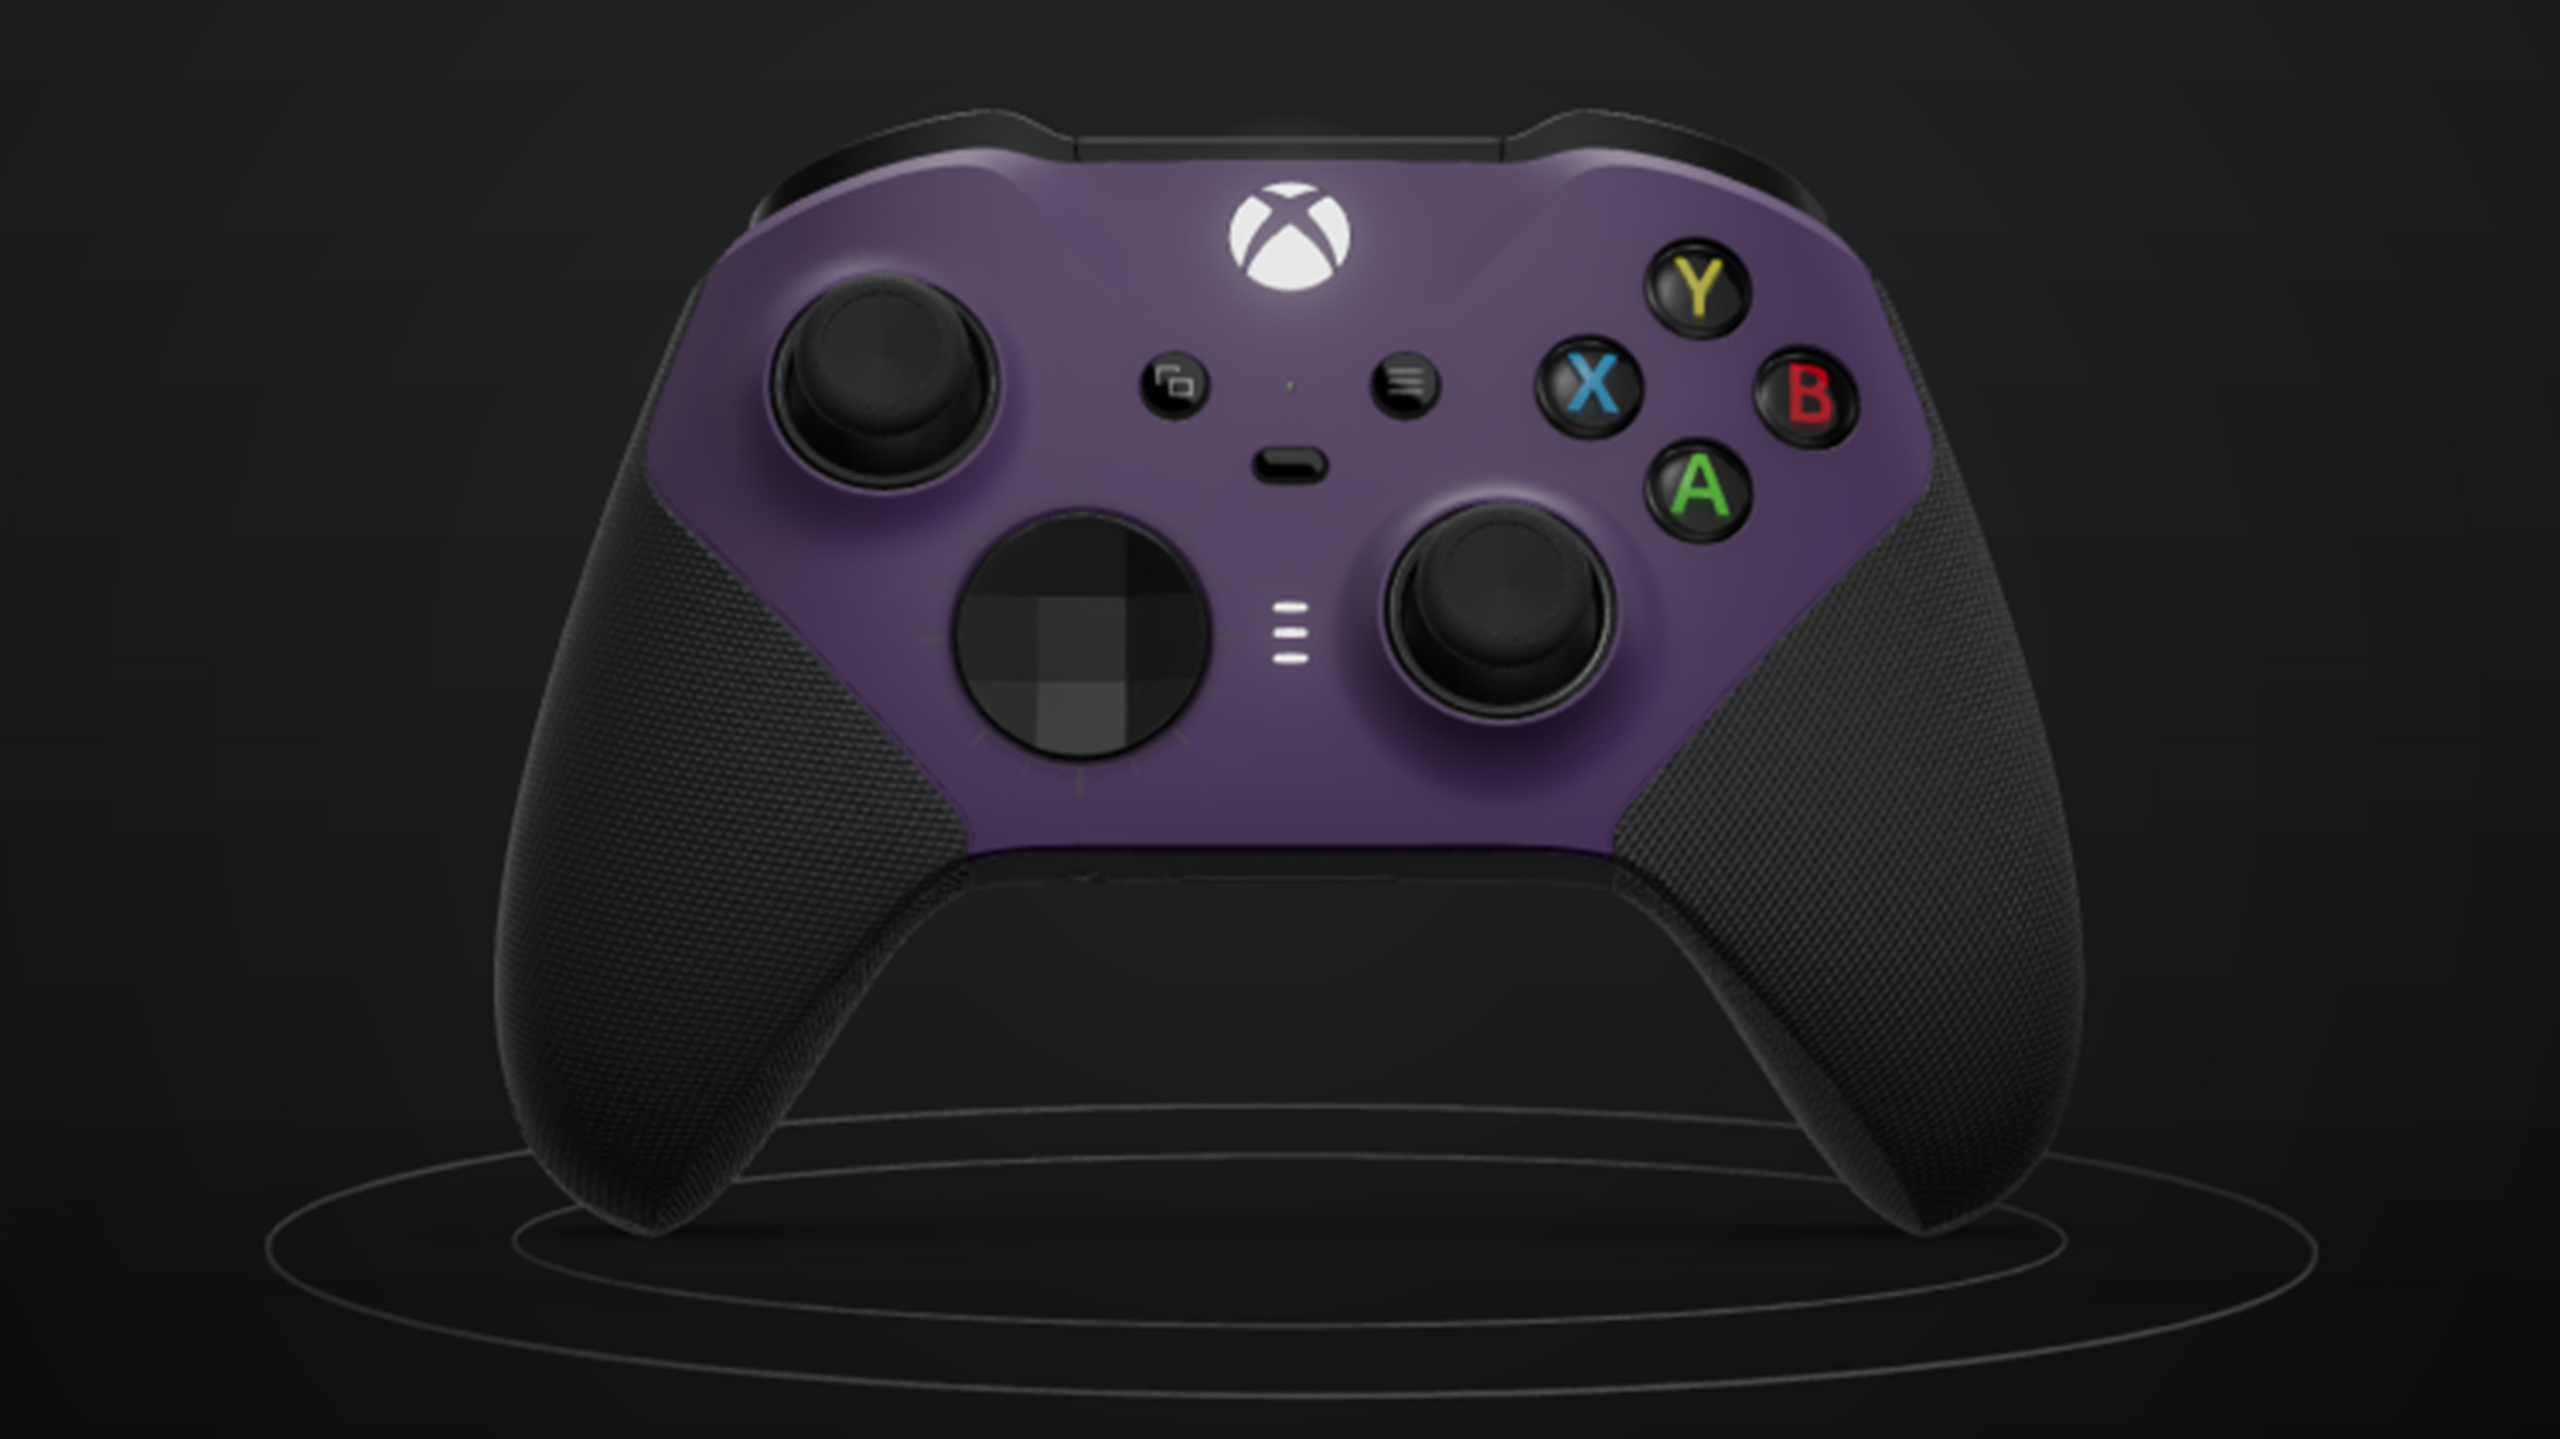 Astral Purple Xbox controllers may arrive on store shelves in September